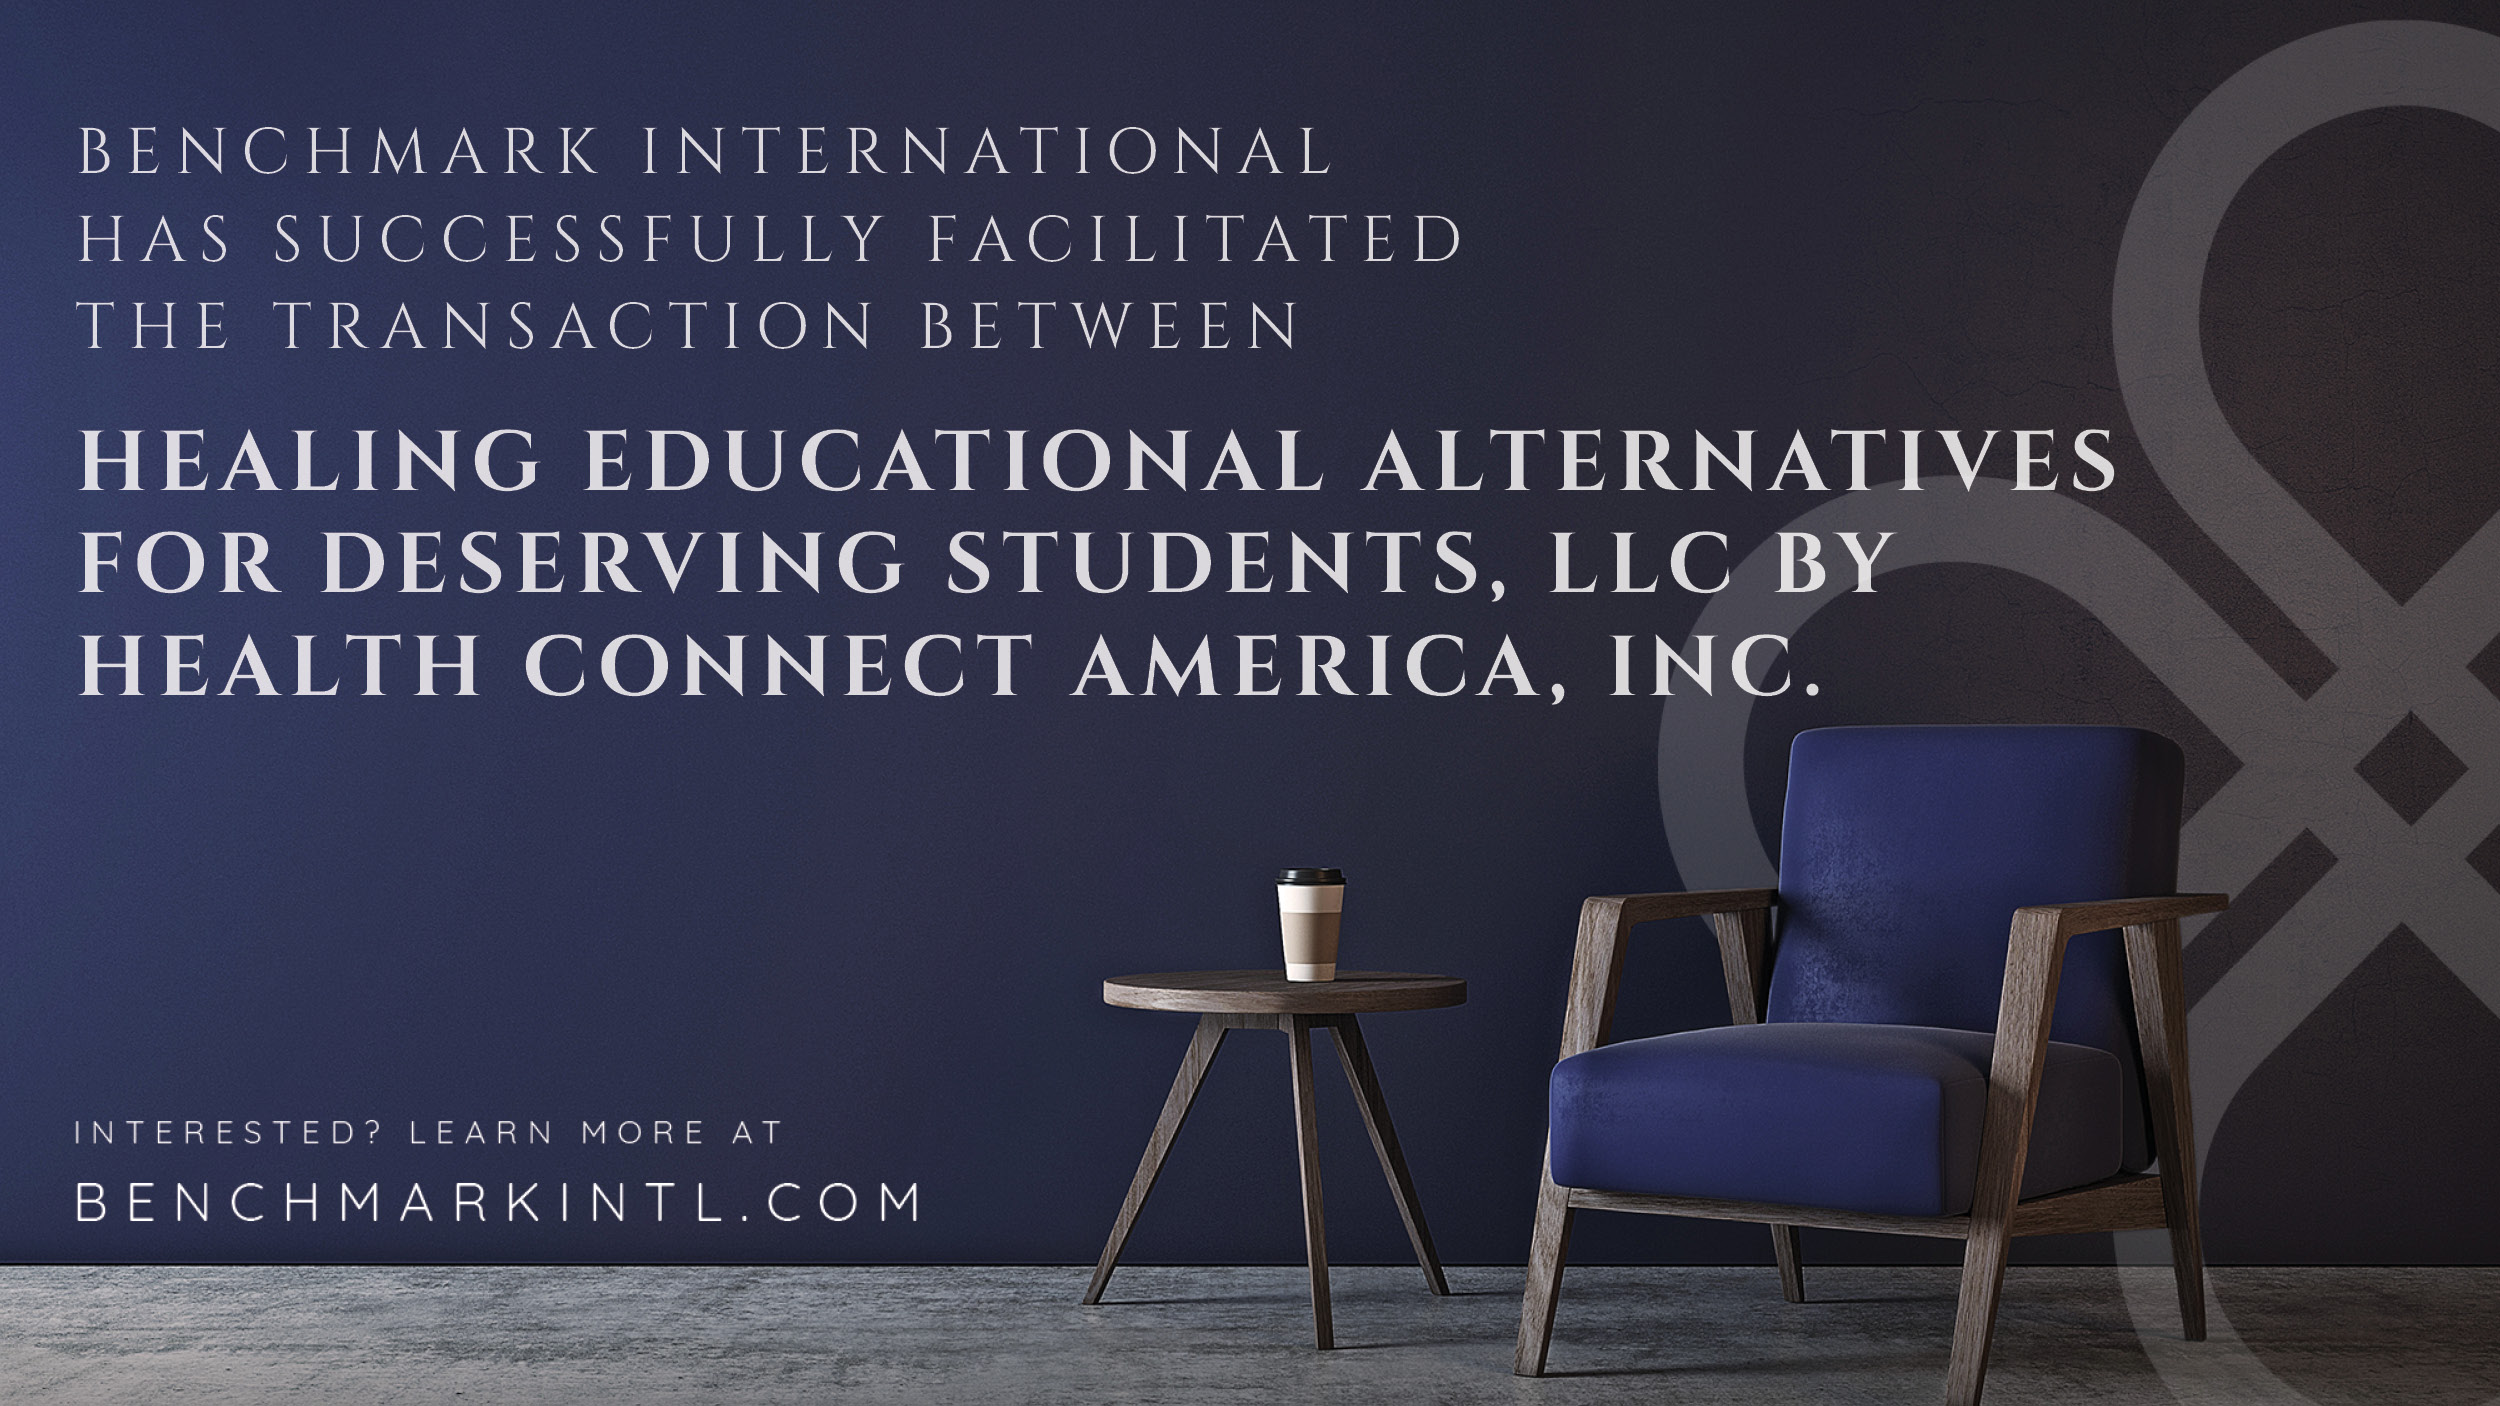 Benchmark International Successfully Facilitated the Transaction Between Healing Educational Alternatives for Deserving Students, LLC and Health Connect America, Inc.